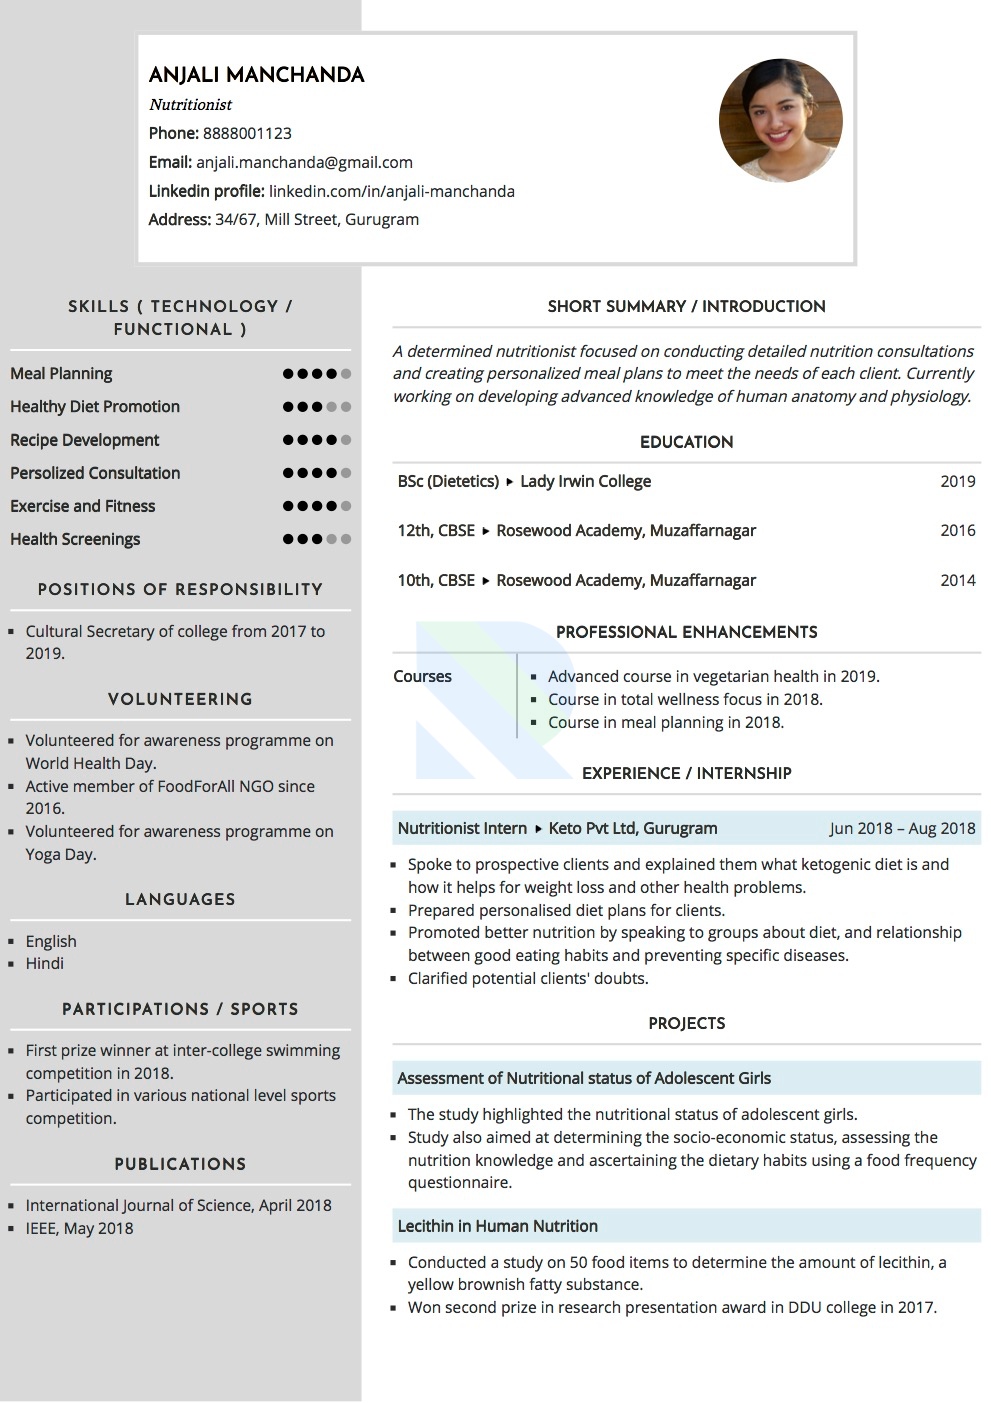 Sample Resumes and CVs by Industry | Resumod